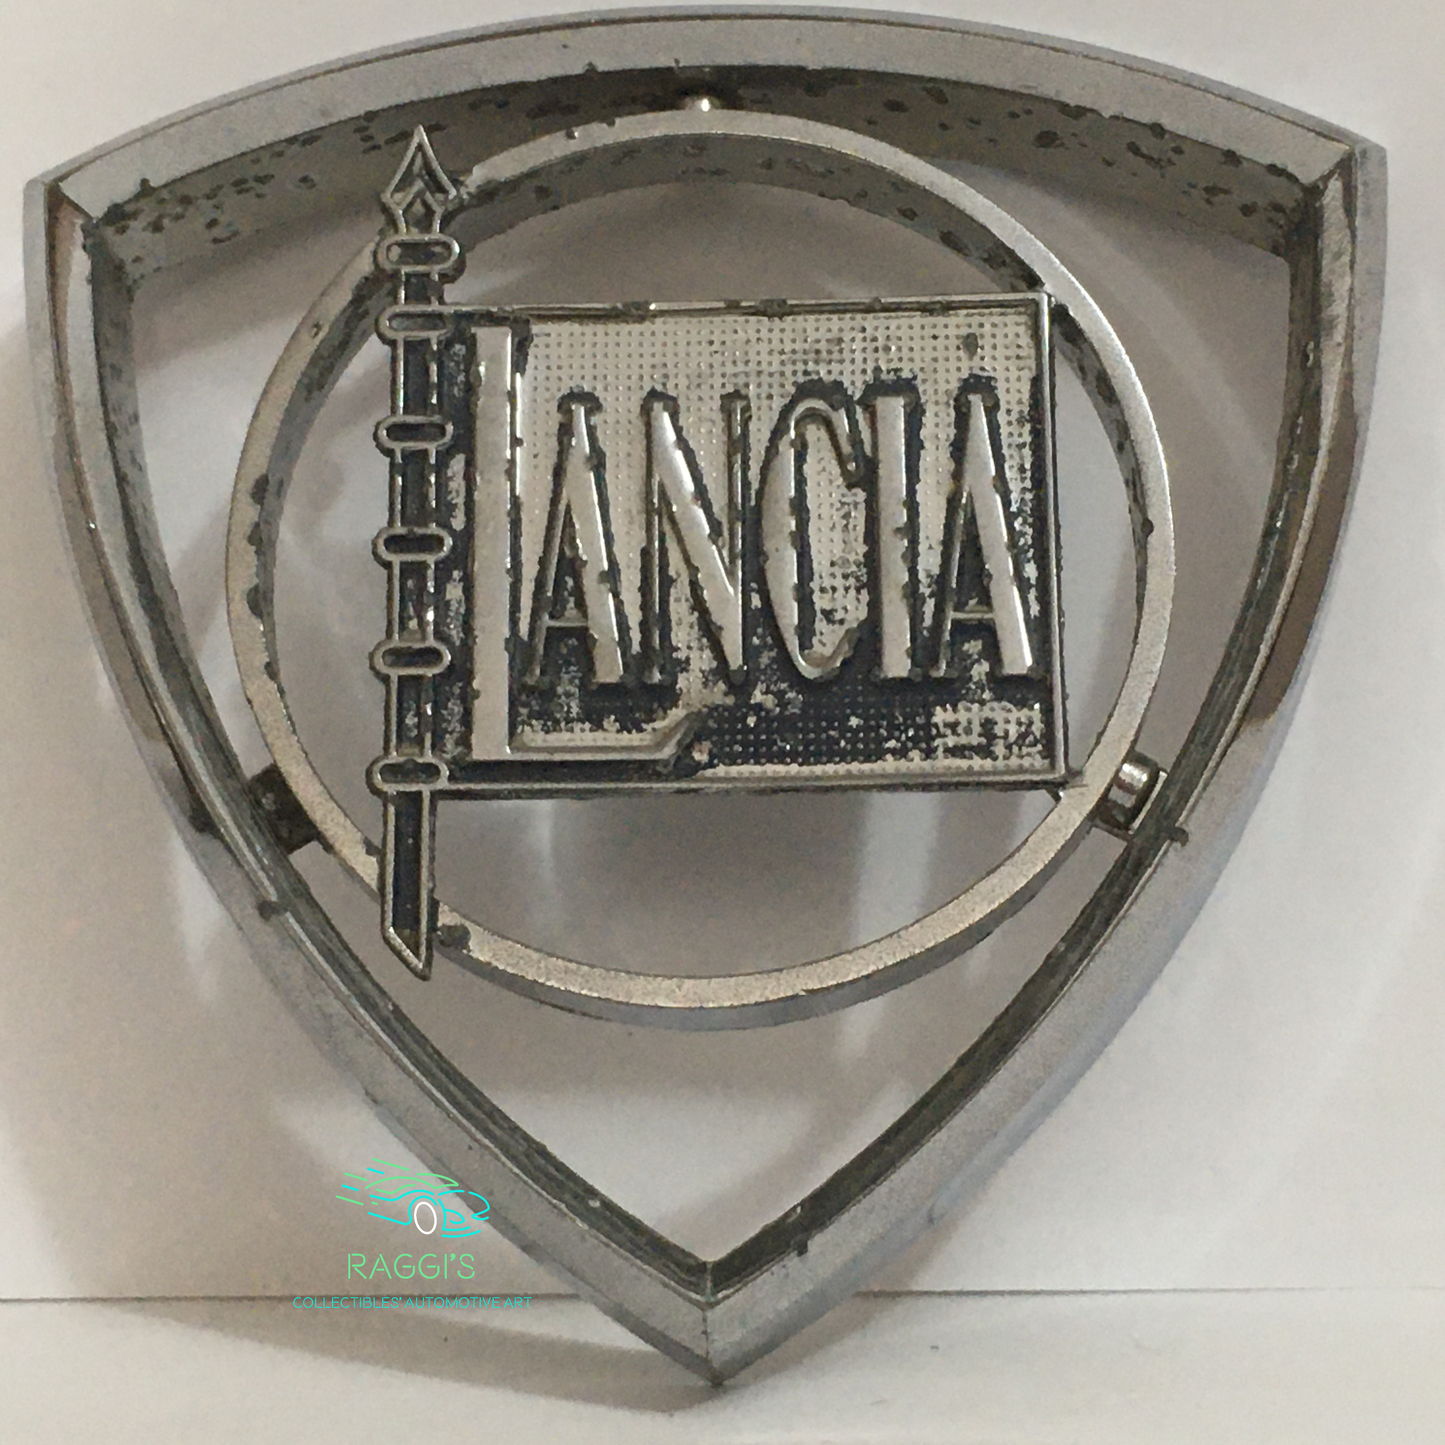 Lancia, Original Lancia emblem in metal mounted on cars produced since the 1950s